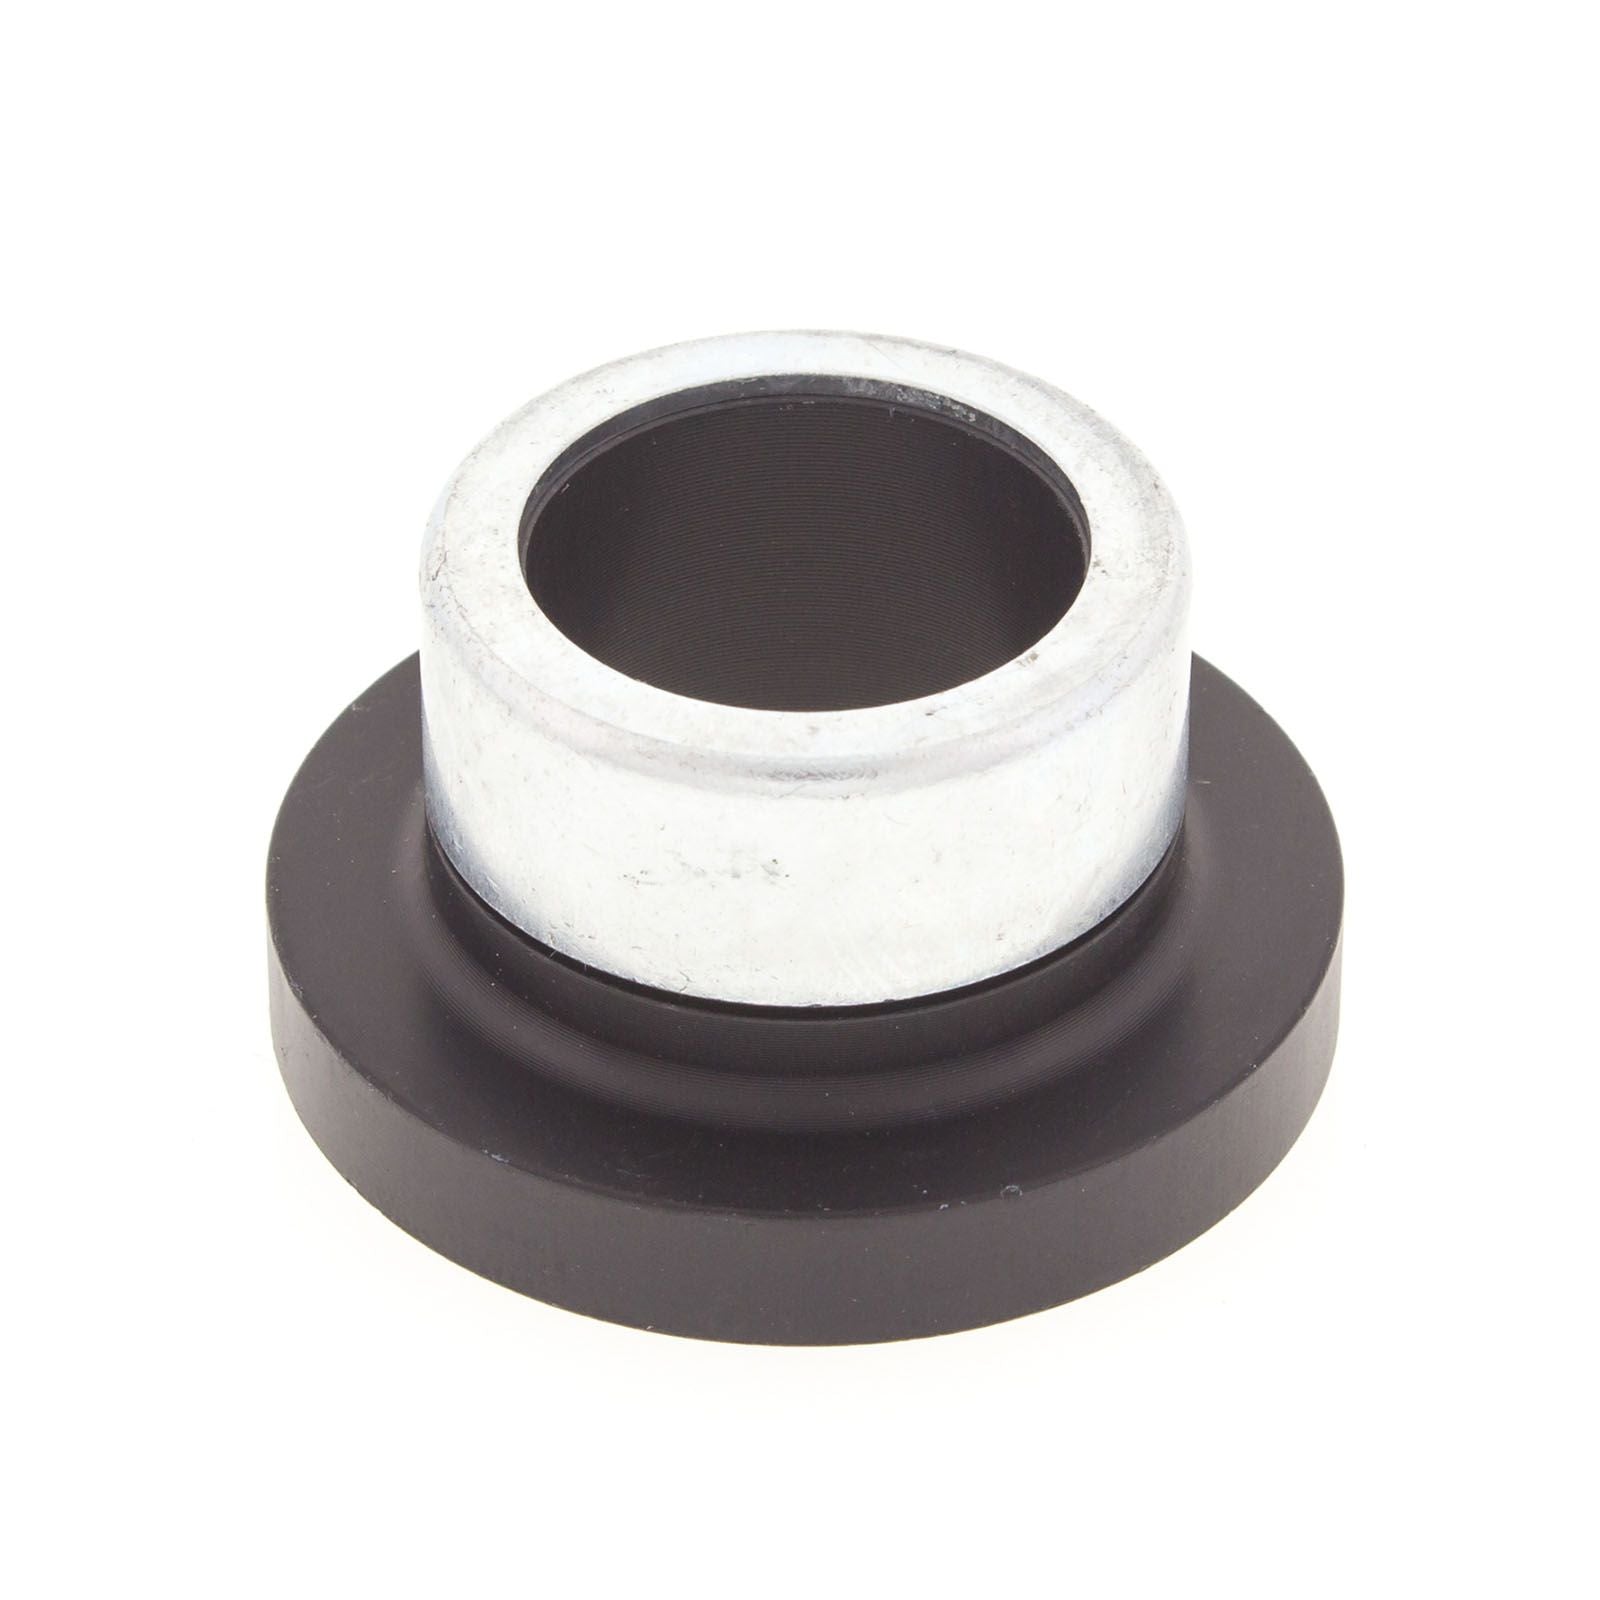 New ALL BALLS Racing Wheel Spacer Kit #AB1110781